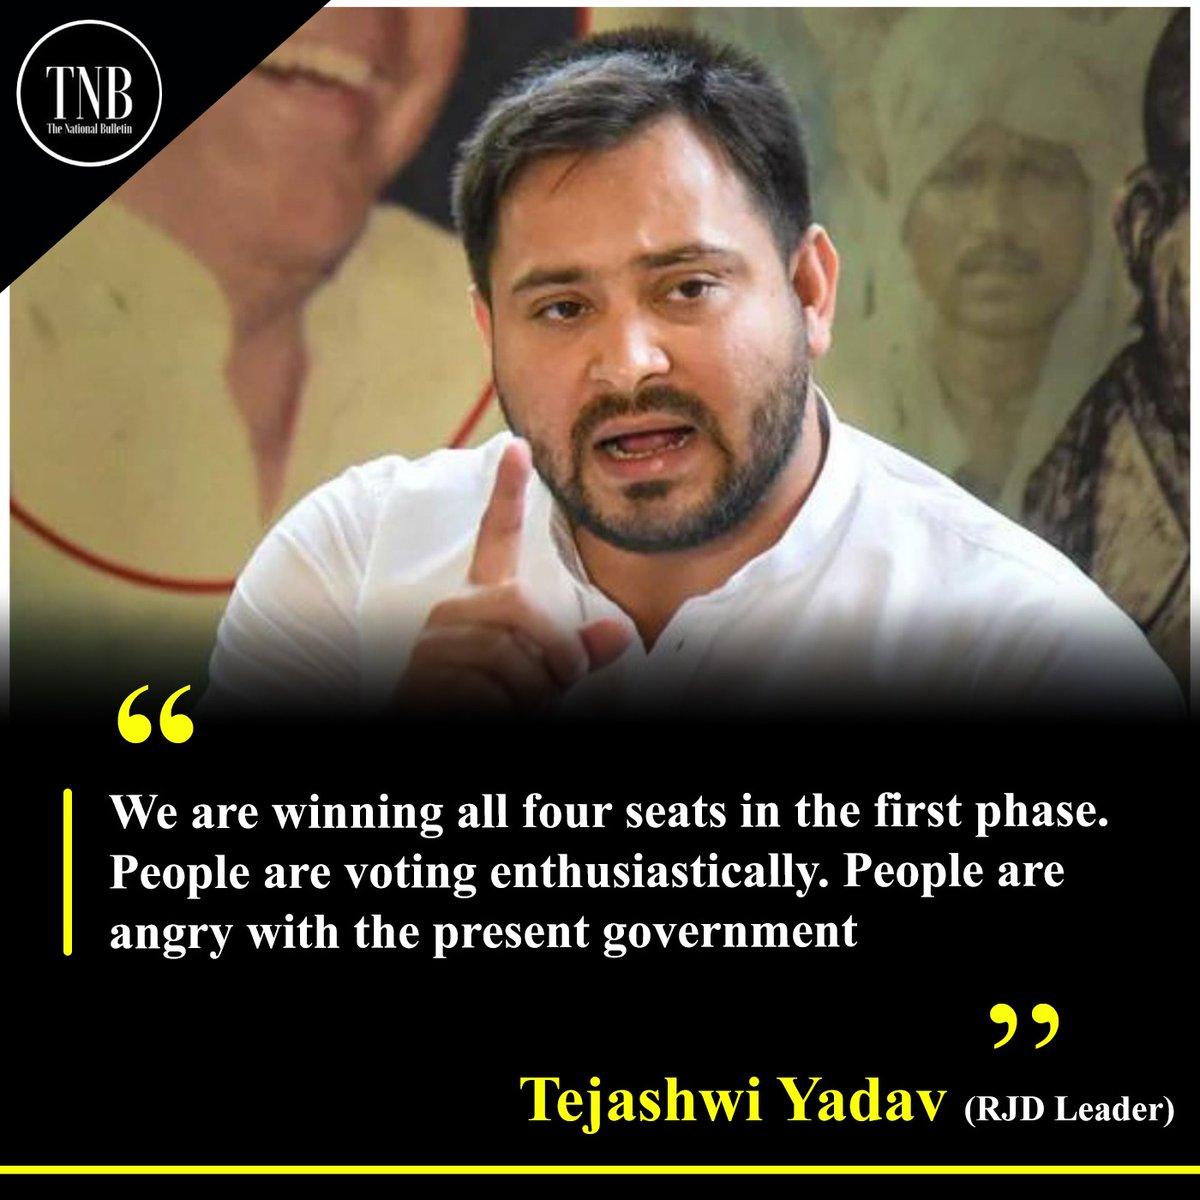 'We are winning all four seats in the first phase. People are voting enthusiastically. People are angry with the present government' @yadavtejashwi (RJD Leader). #TejshwiYadav #RJD #Bihar #LokSabhaElections2024    #LokSabhaElection2024 #LokSabhaElection